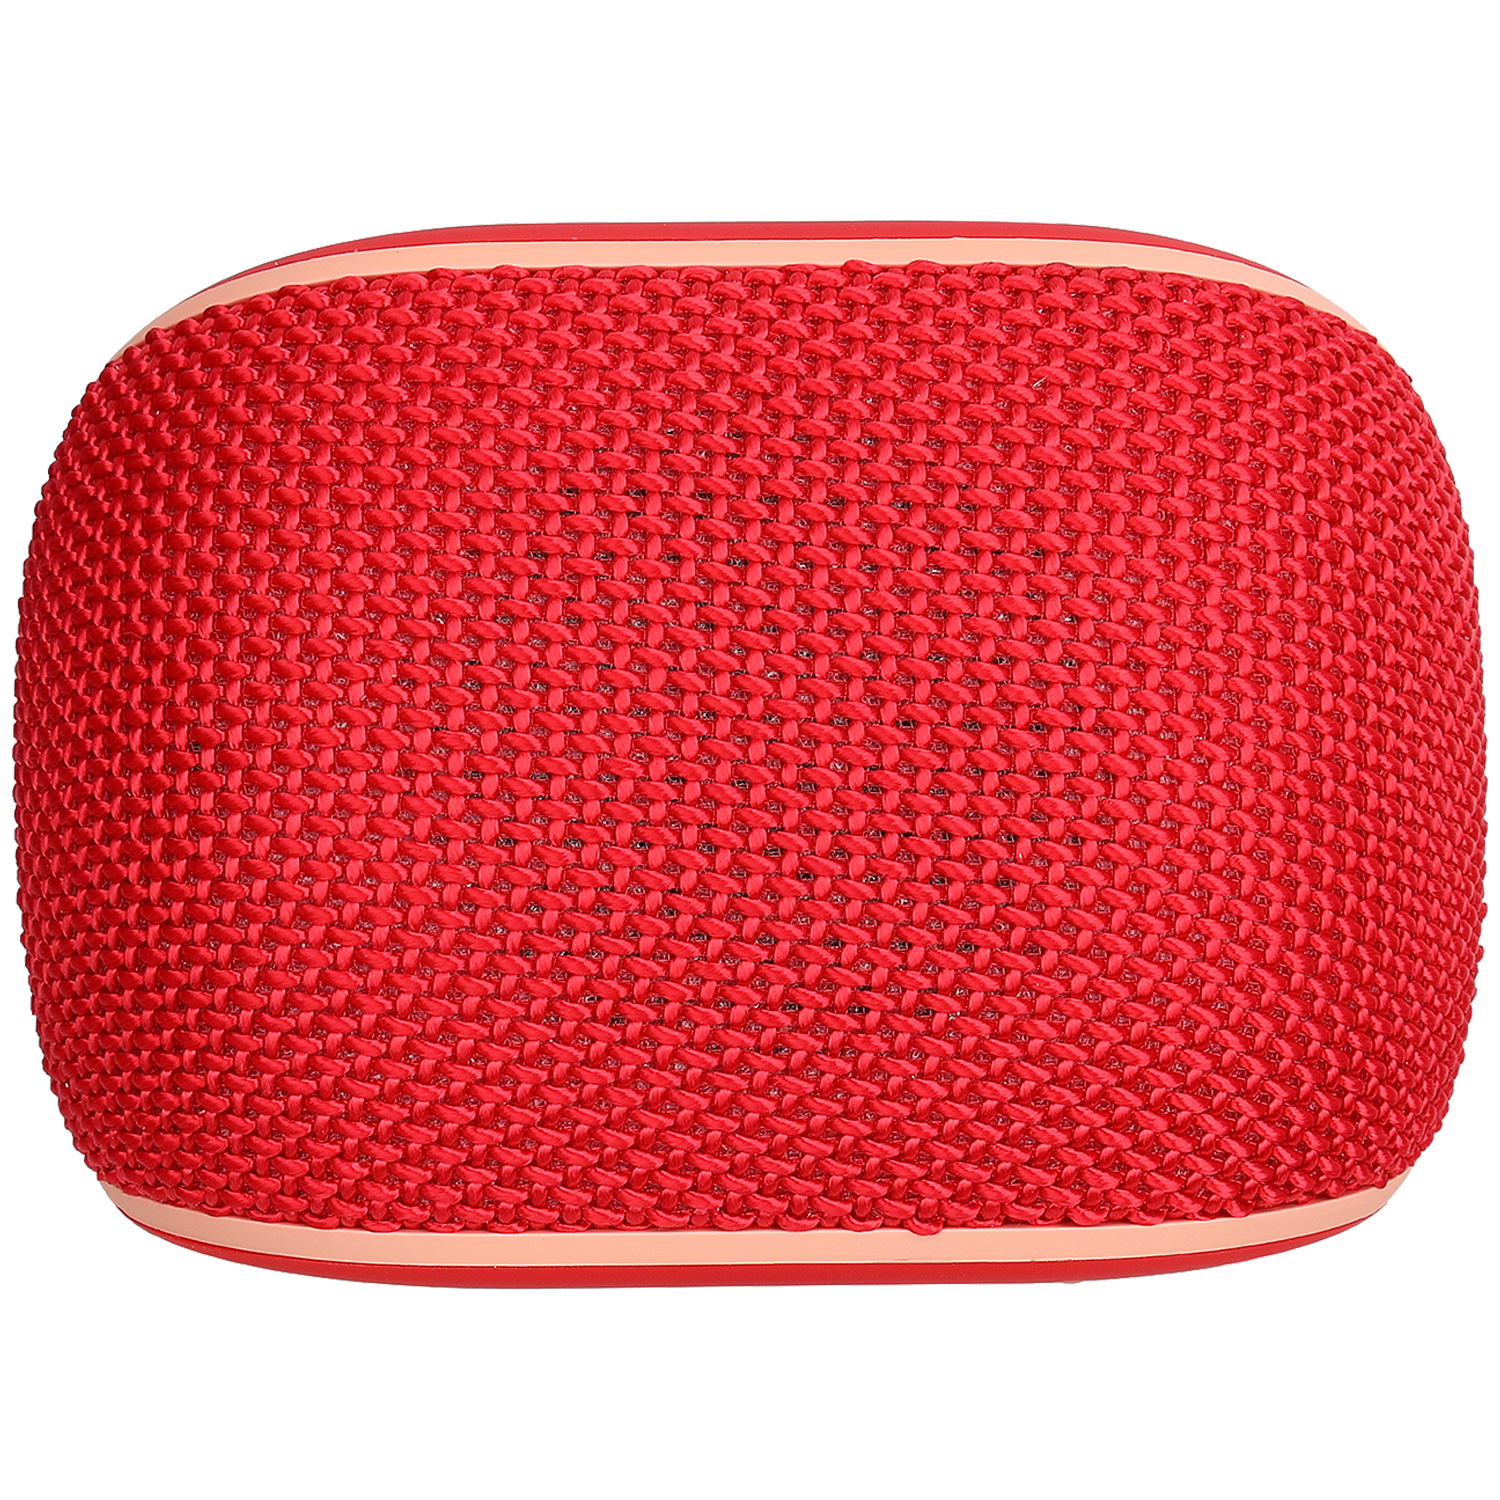 Lumiford GoMusic 4 Watts Portable Bluetooth Speaker (Truly Wireless Stereo Technology, BT12, Red)_1